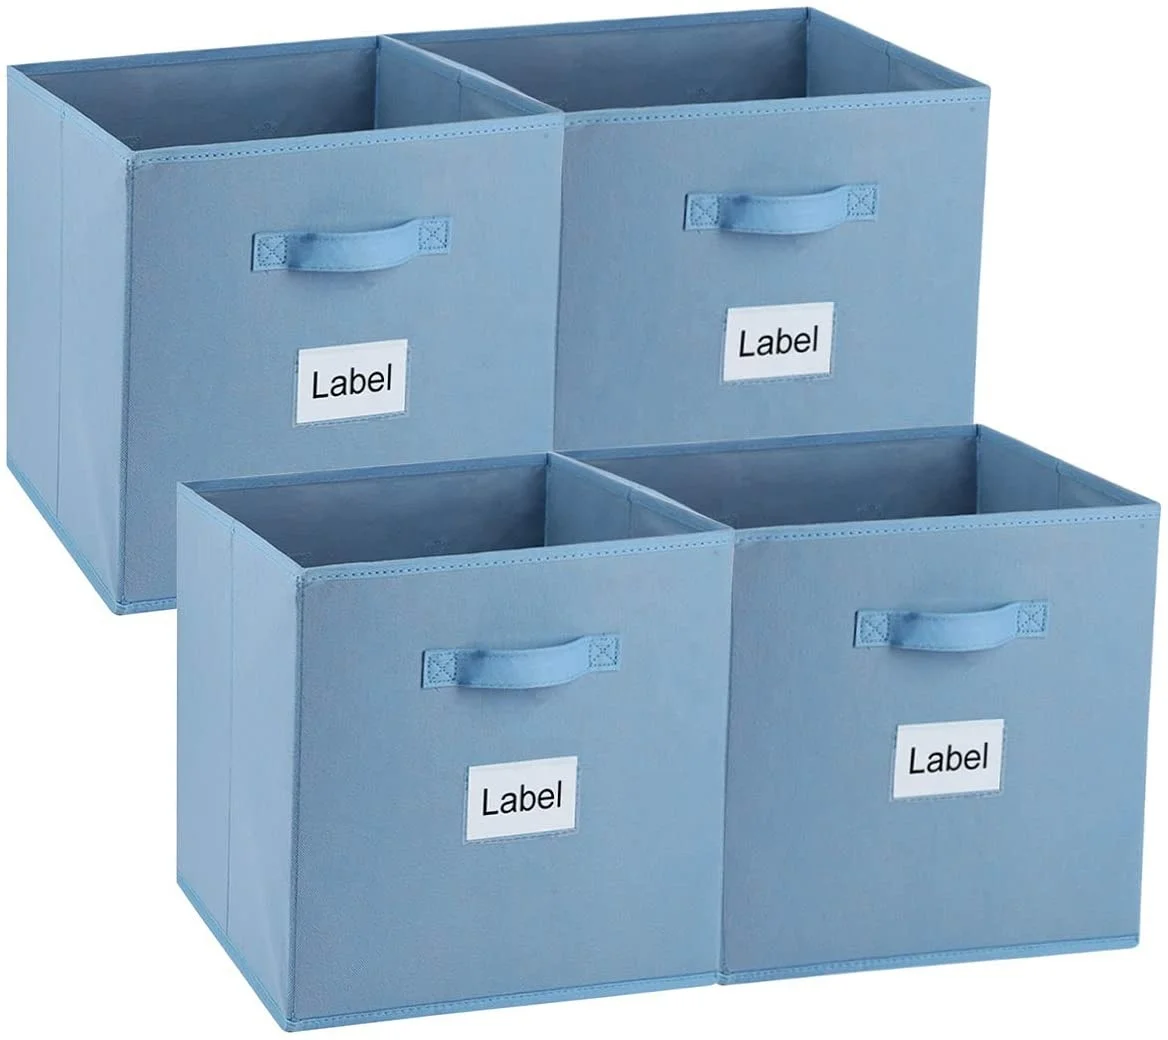 

Foldable Cube Storage Bins, 13 Inch Collapsible Cloth Storage Boxes Containers Organizer Baskets with Dual Handle, Any color is available